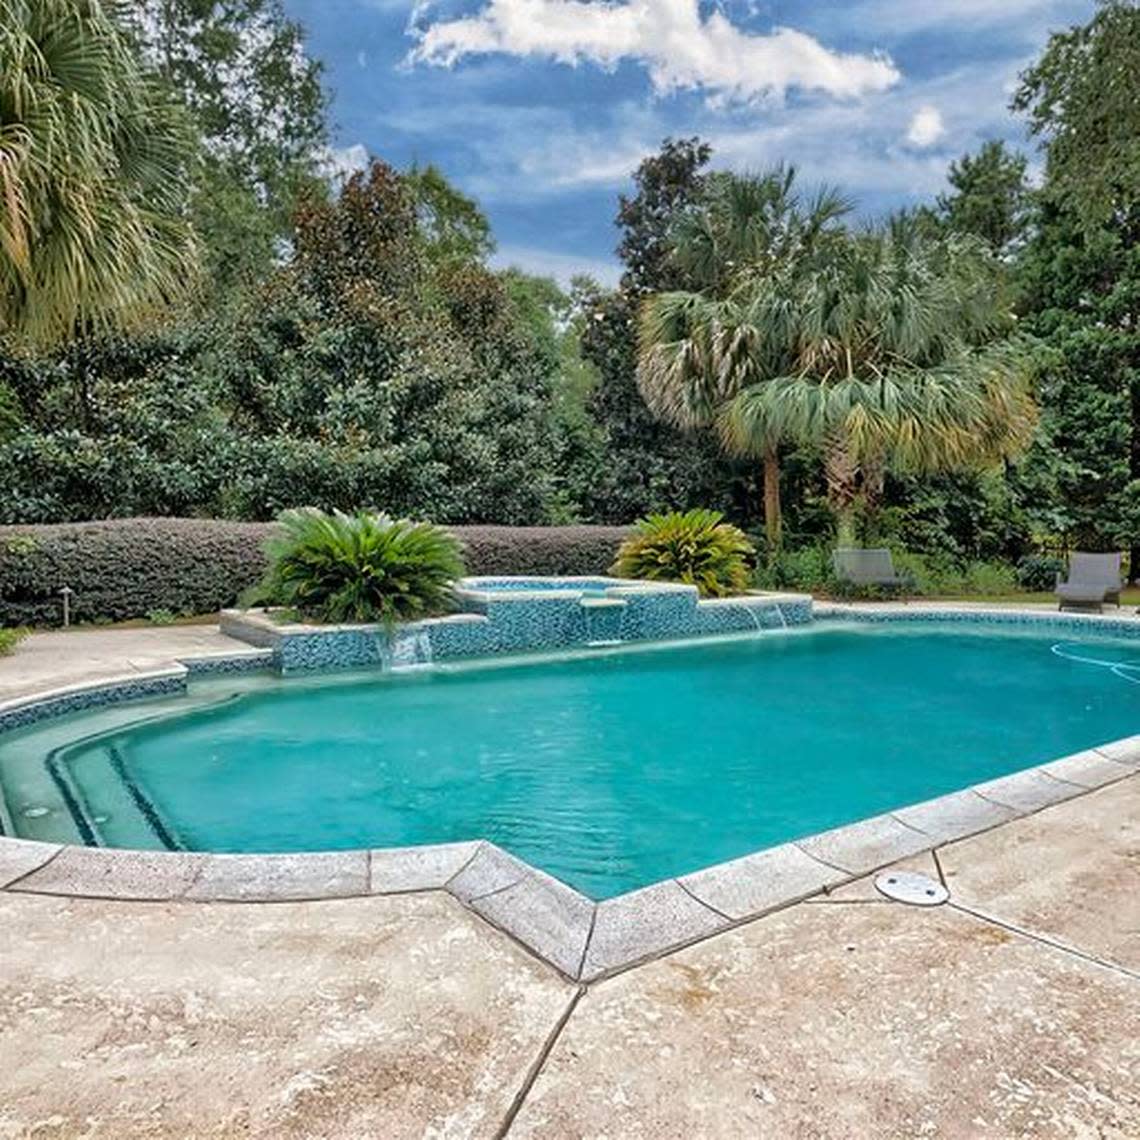 The swimming pool included with a $1.3 million luxury home for sale in Columbia.